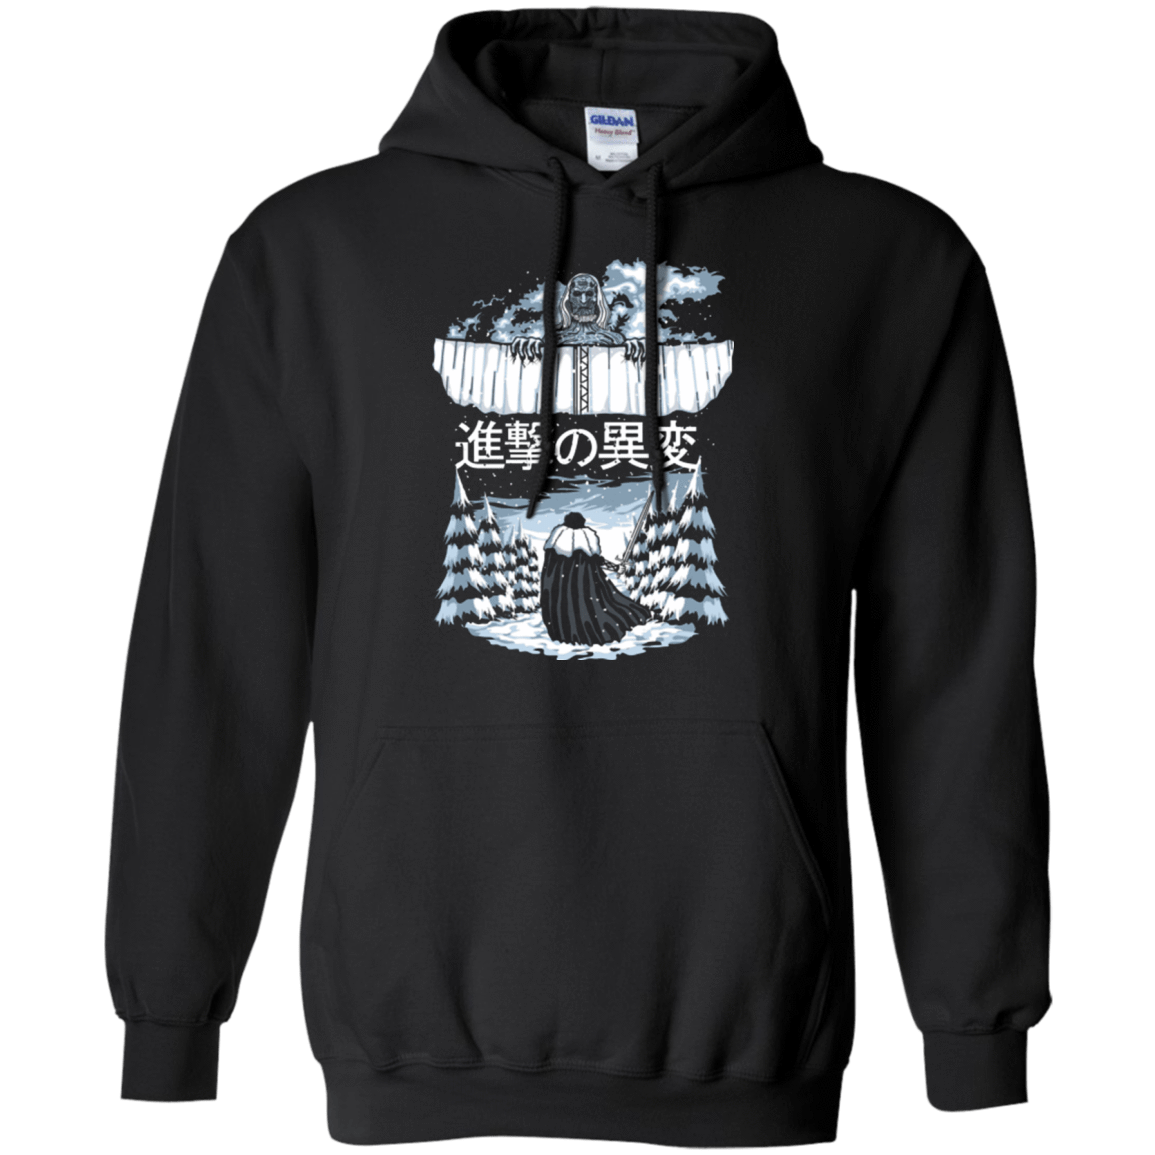 Sweatshirts Black / Small Attack of the Others Pullover Hoodie